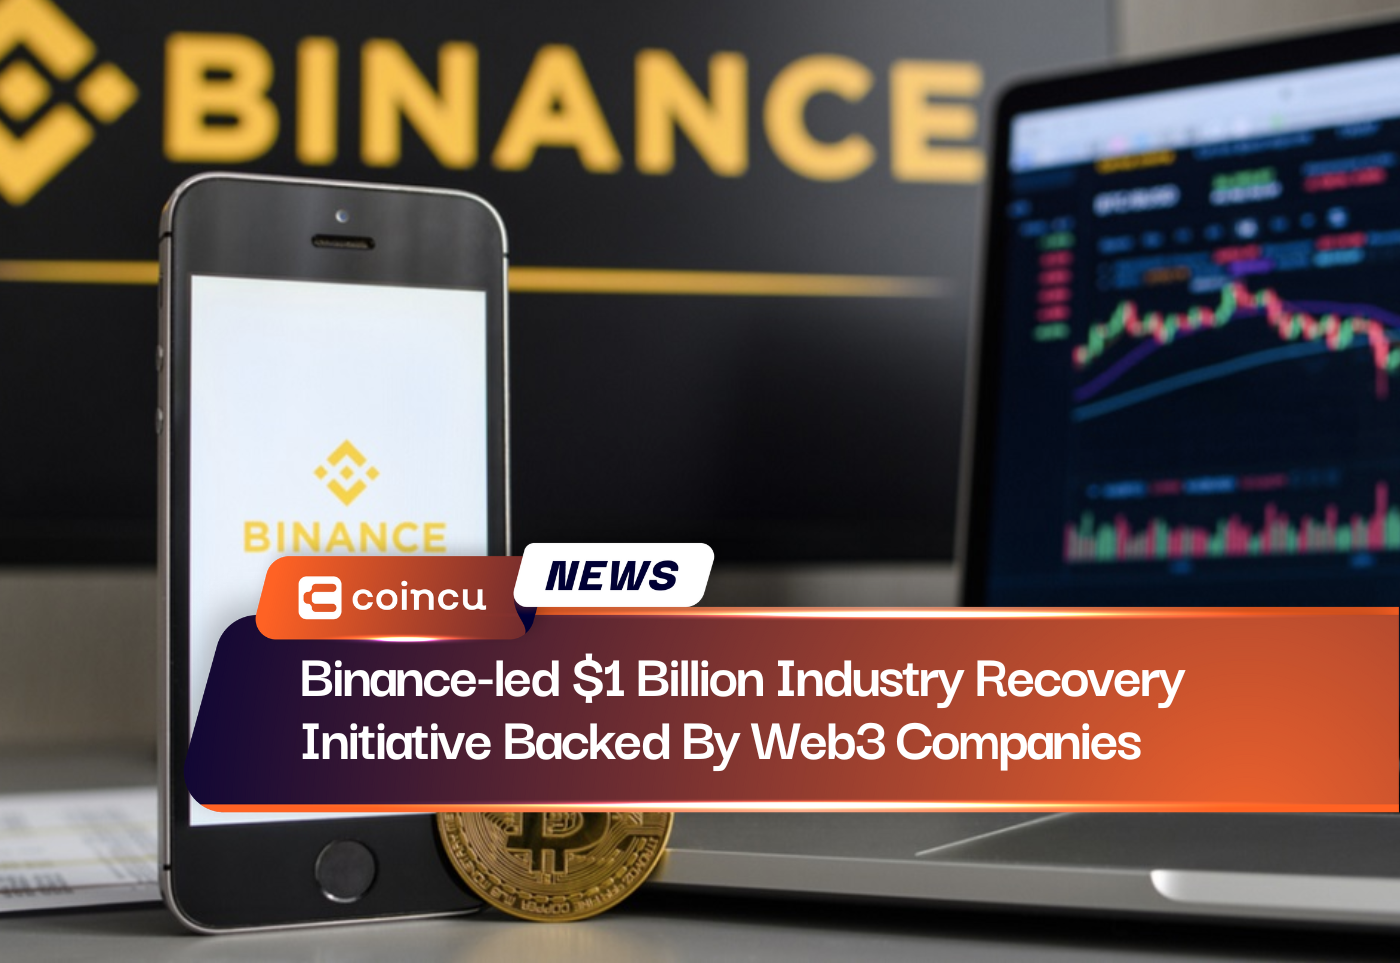 Binance-led $1 Billion Industry Recovery Initiative Backed By Web3 Companies